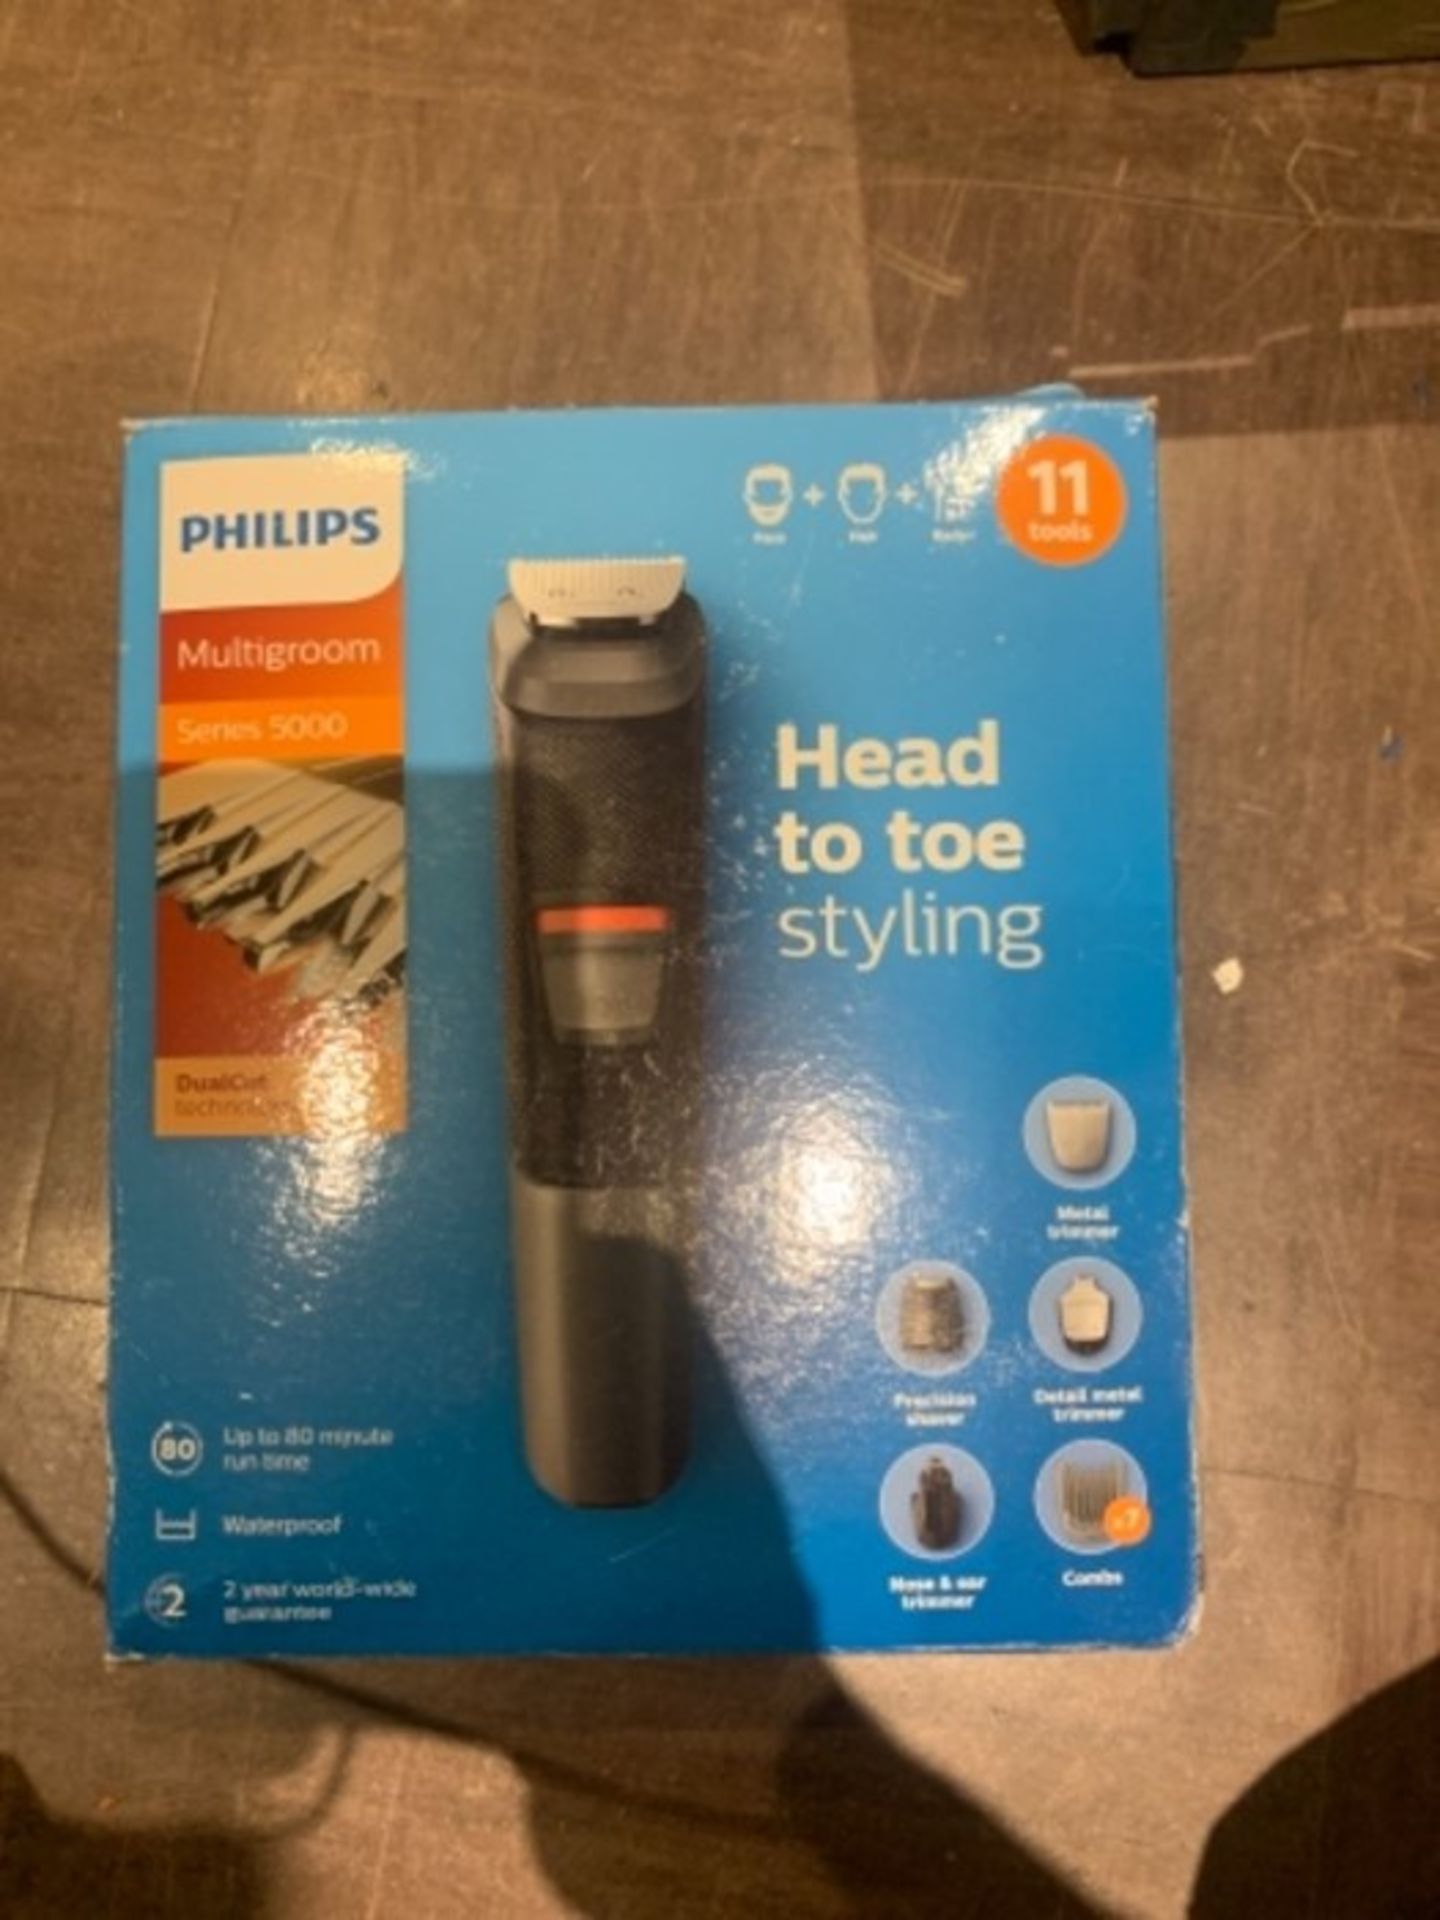 Philips 11-in-1 All-In-One Trimmer, Series 5000 Grooming Kit, Beard Trimmer, Hair Clip - Image 2 of 3